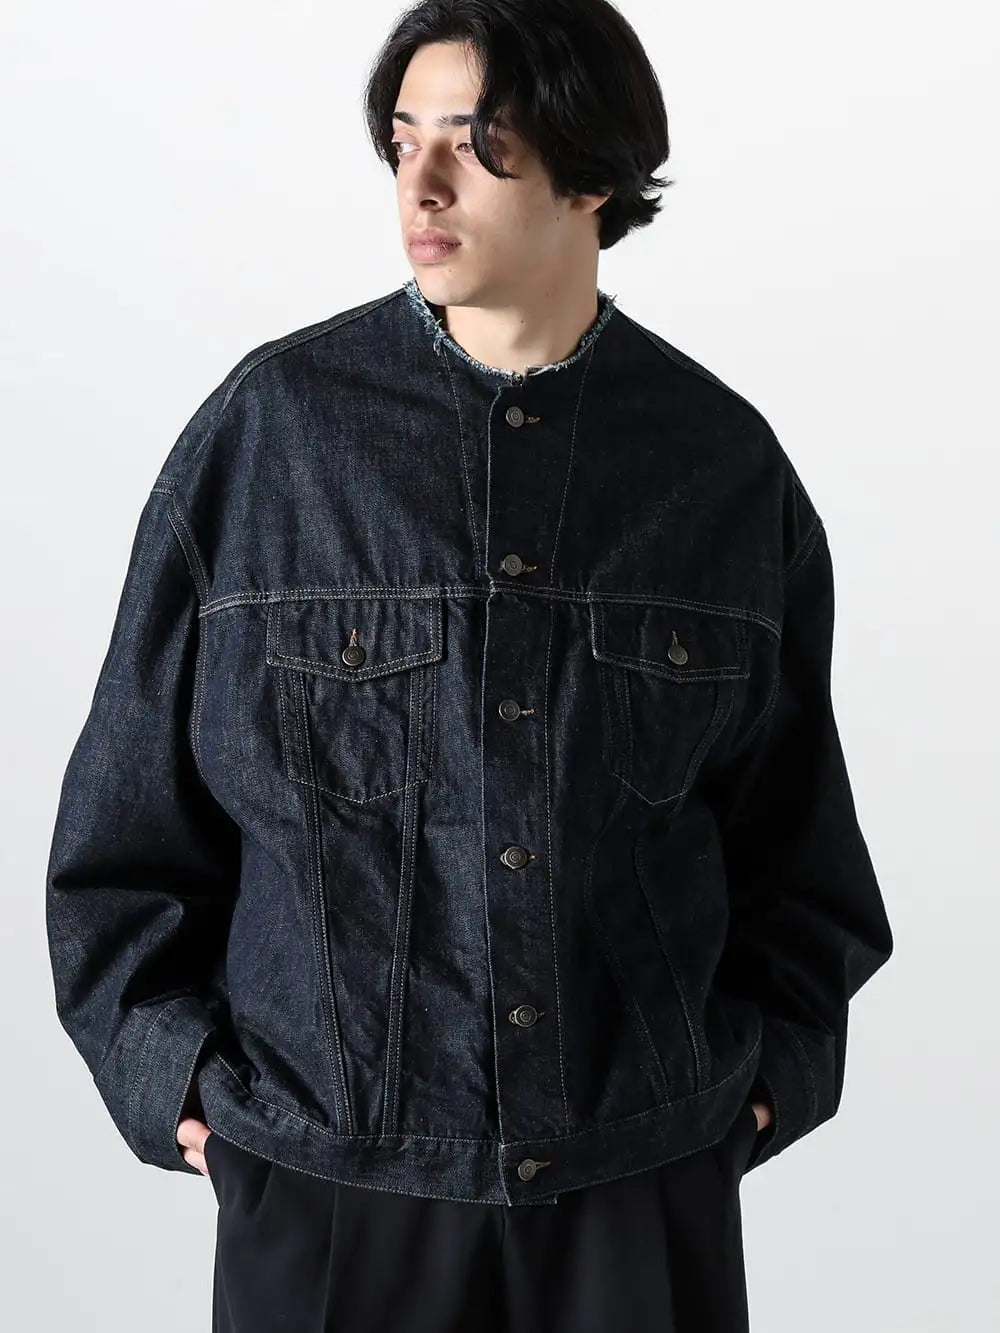 Maison Margiela 24SS - Brand mix coordination with the Denim Jacket, which expresses a work-in-progress aesthetic, as the star of the outfit. - Must-Have Trousers- S50AM0610 - Denim Jacket - IH-24SS-T006-AG-Black-Black-cord - Short Sleeved T-Shirt Black × Black cord 2-001